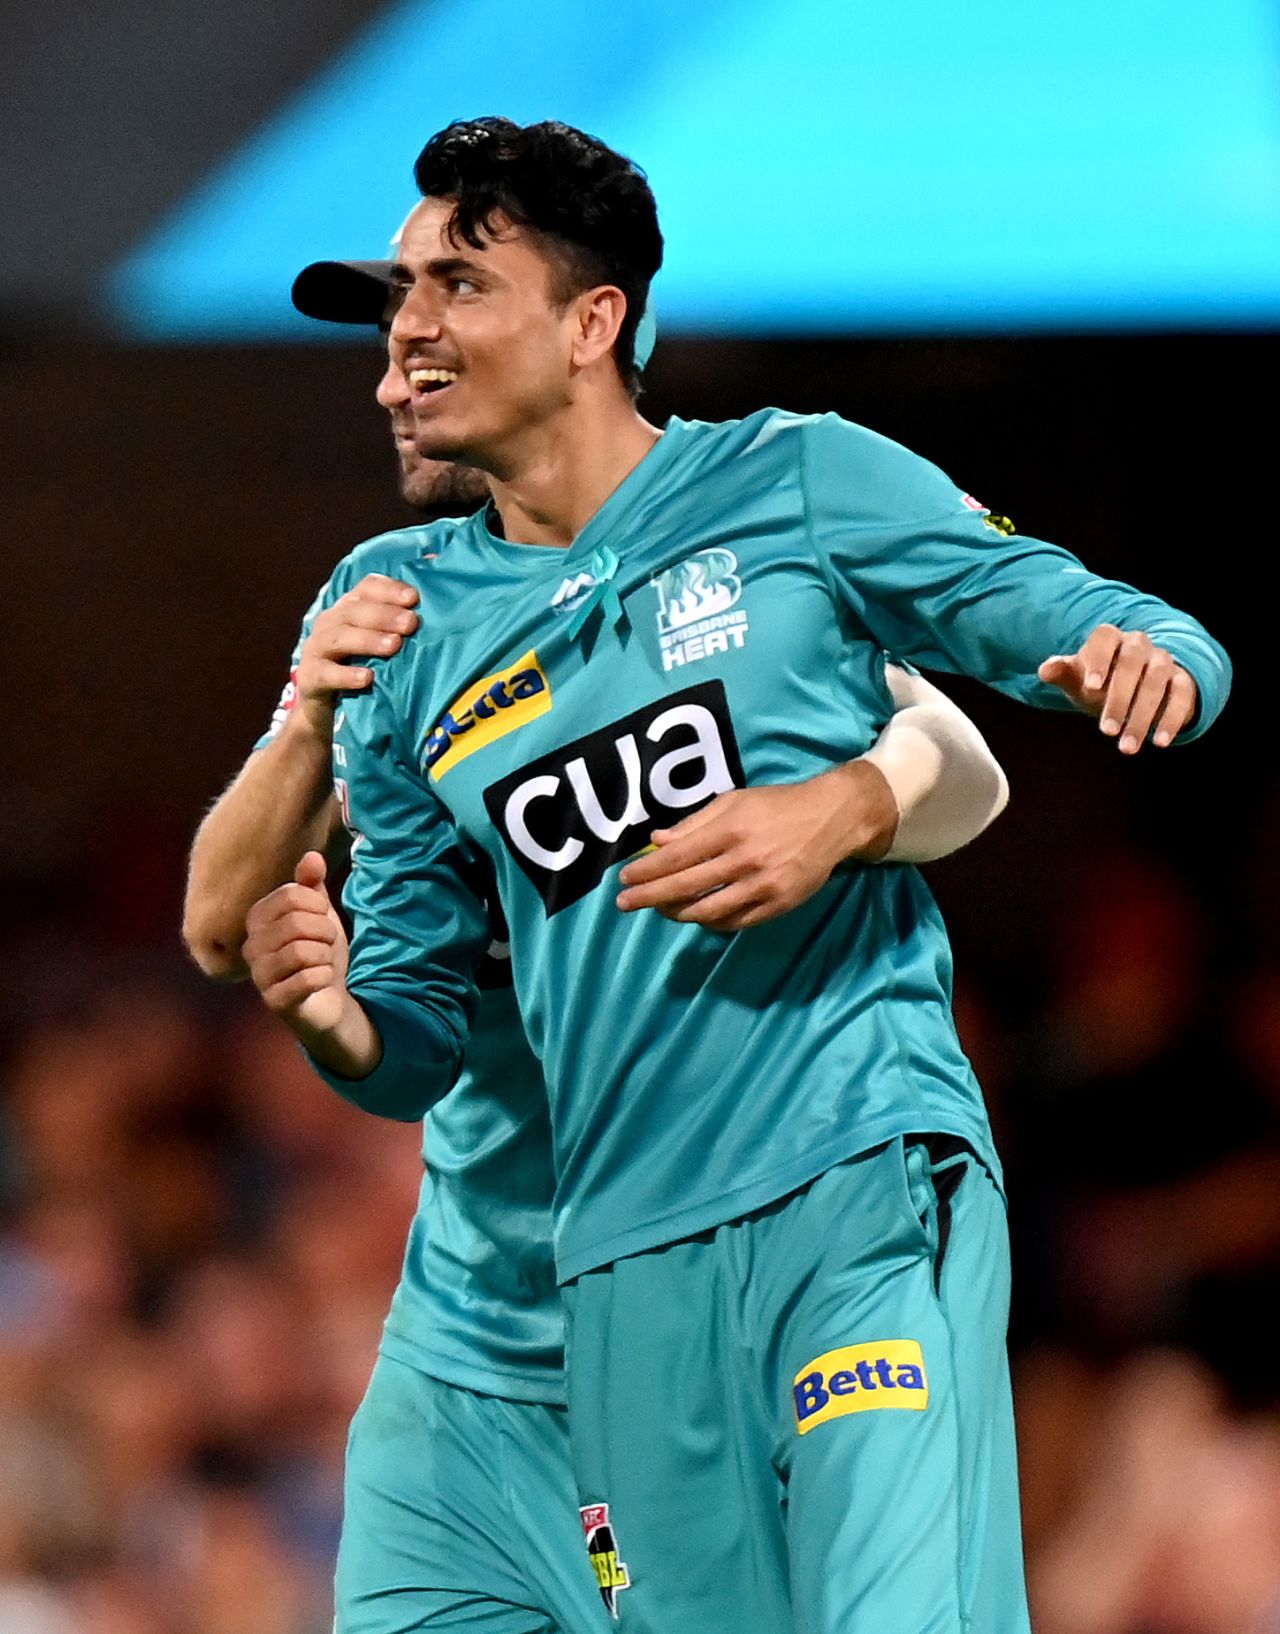 Mujeeb ur Rahman had a brilliant day in the field with two wickets, two catches, and a run-out, Brisbane Heat vs Sydney Thunder, Big Bash League, January 4, 2020